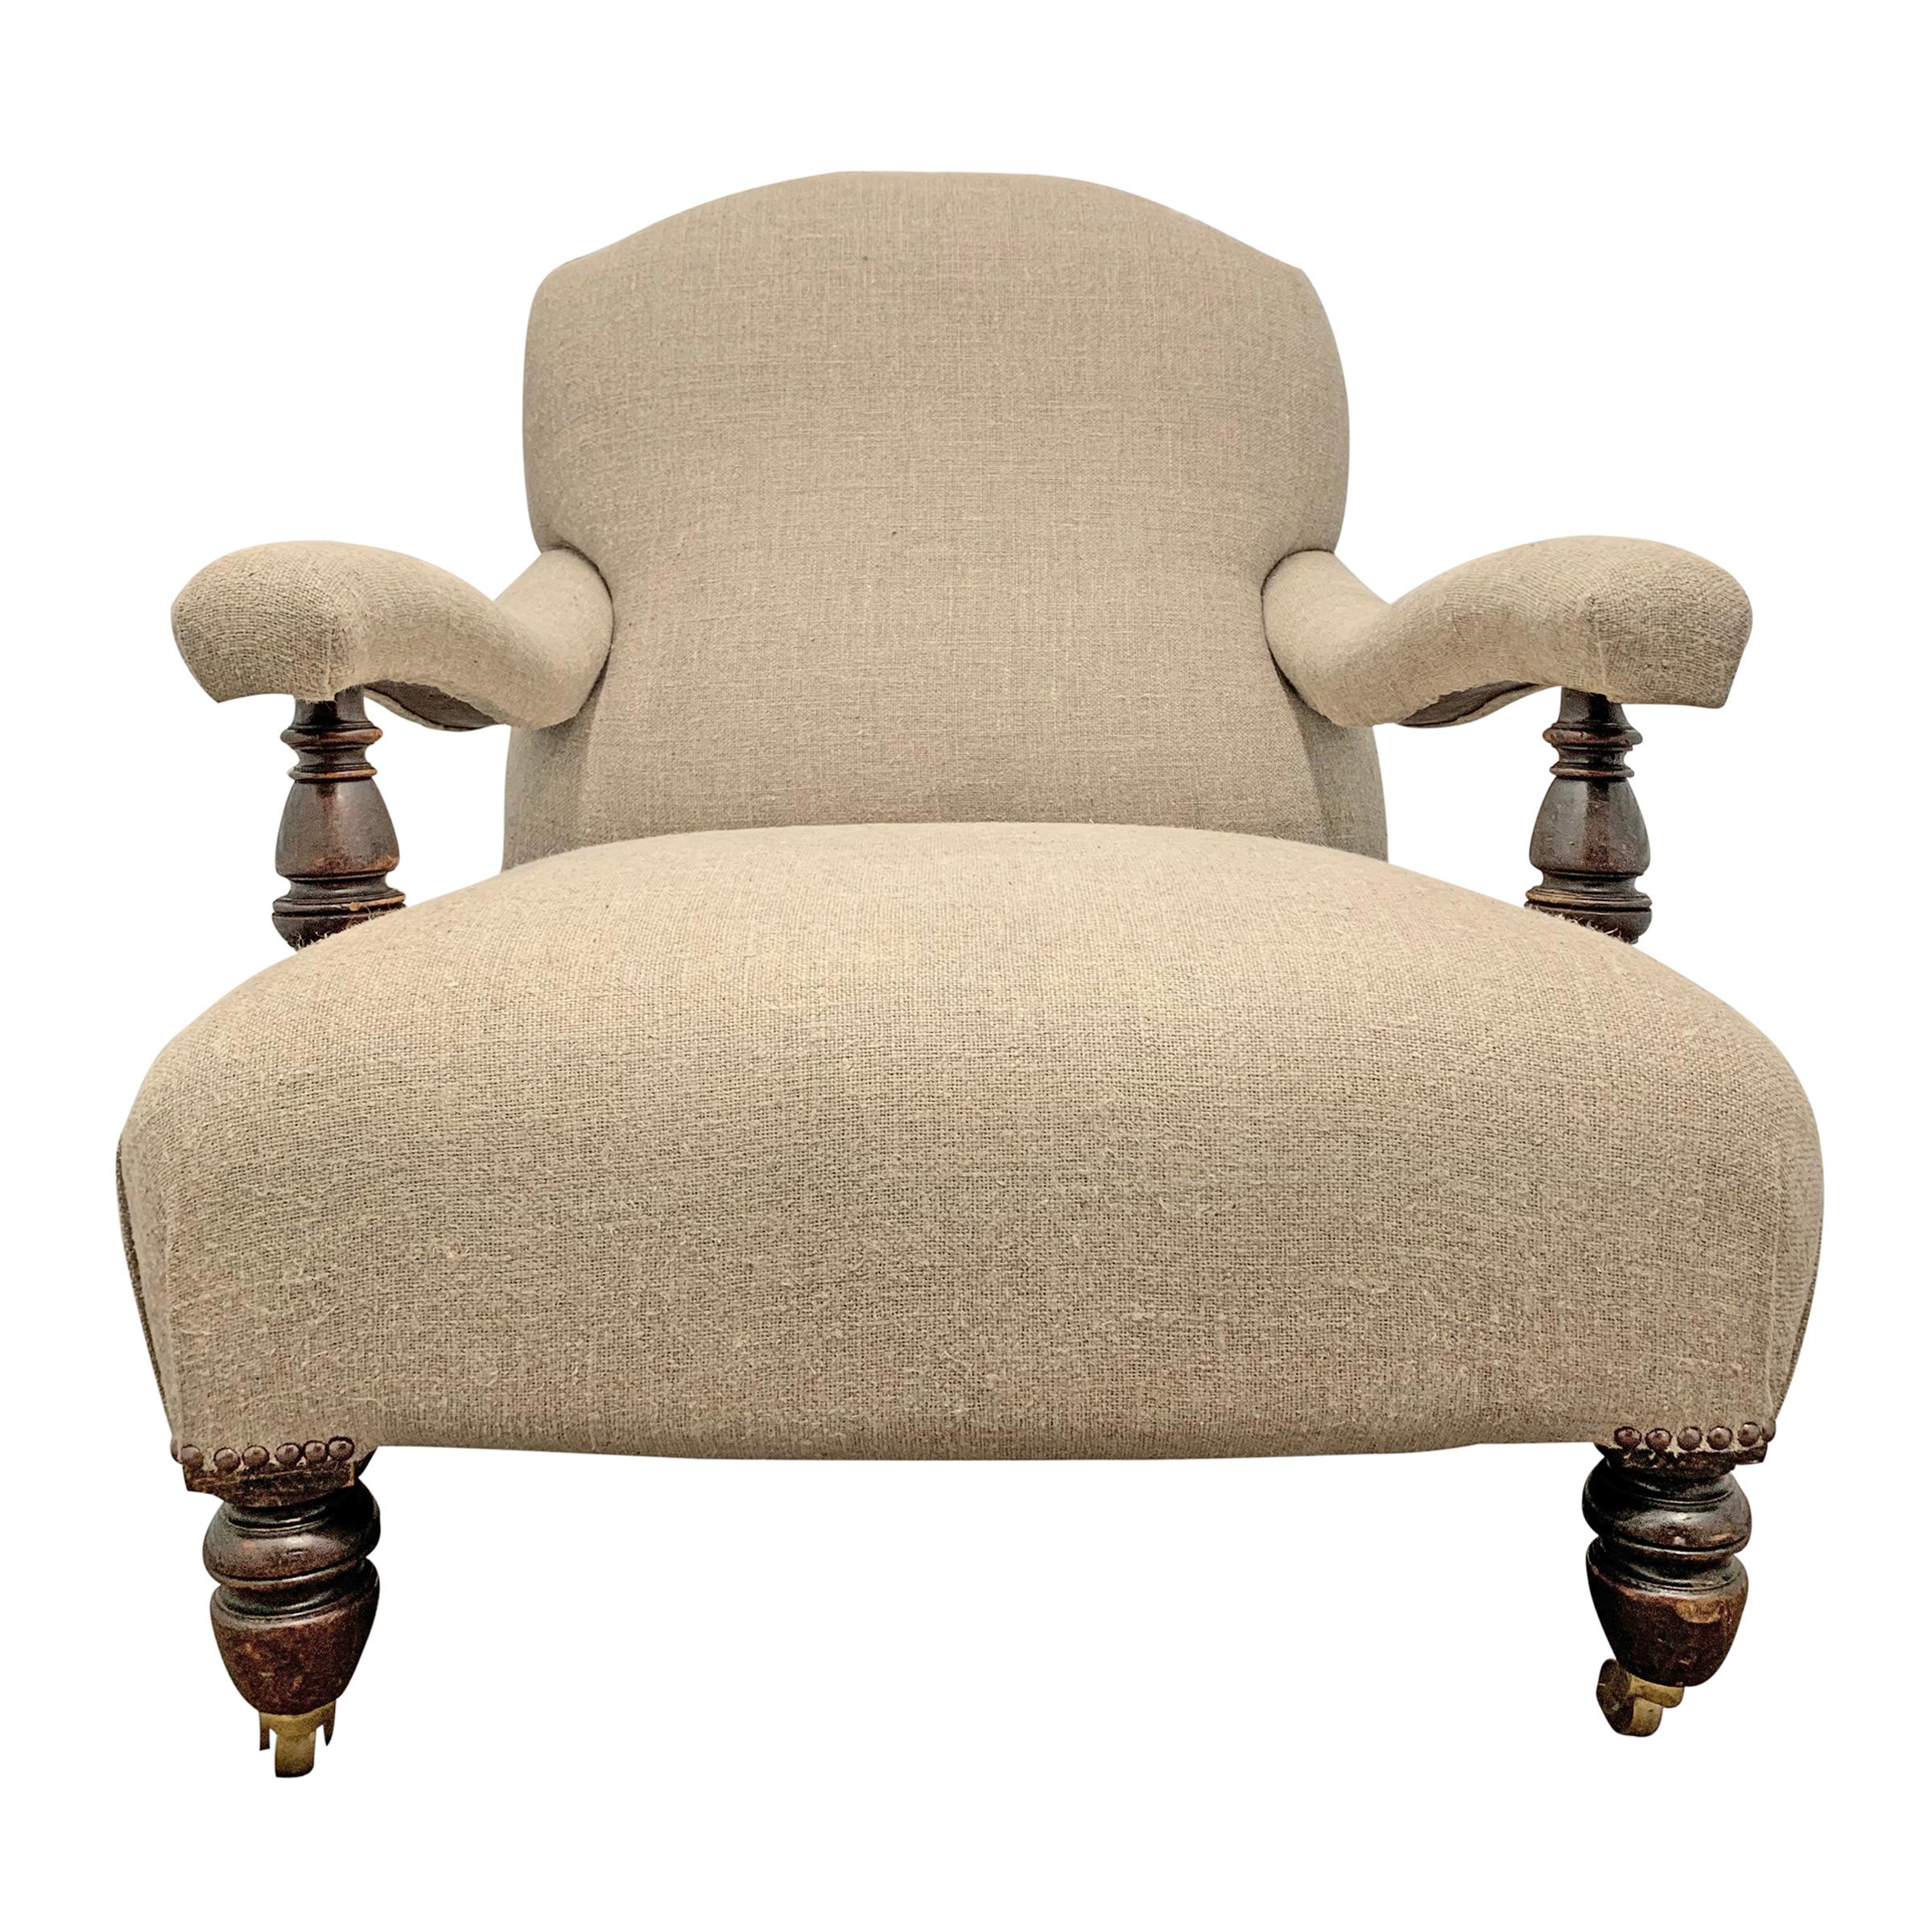 British 19th Century English Country House Armchair